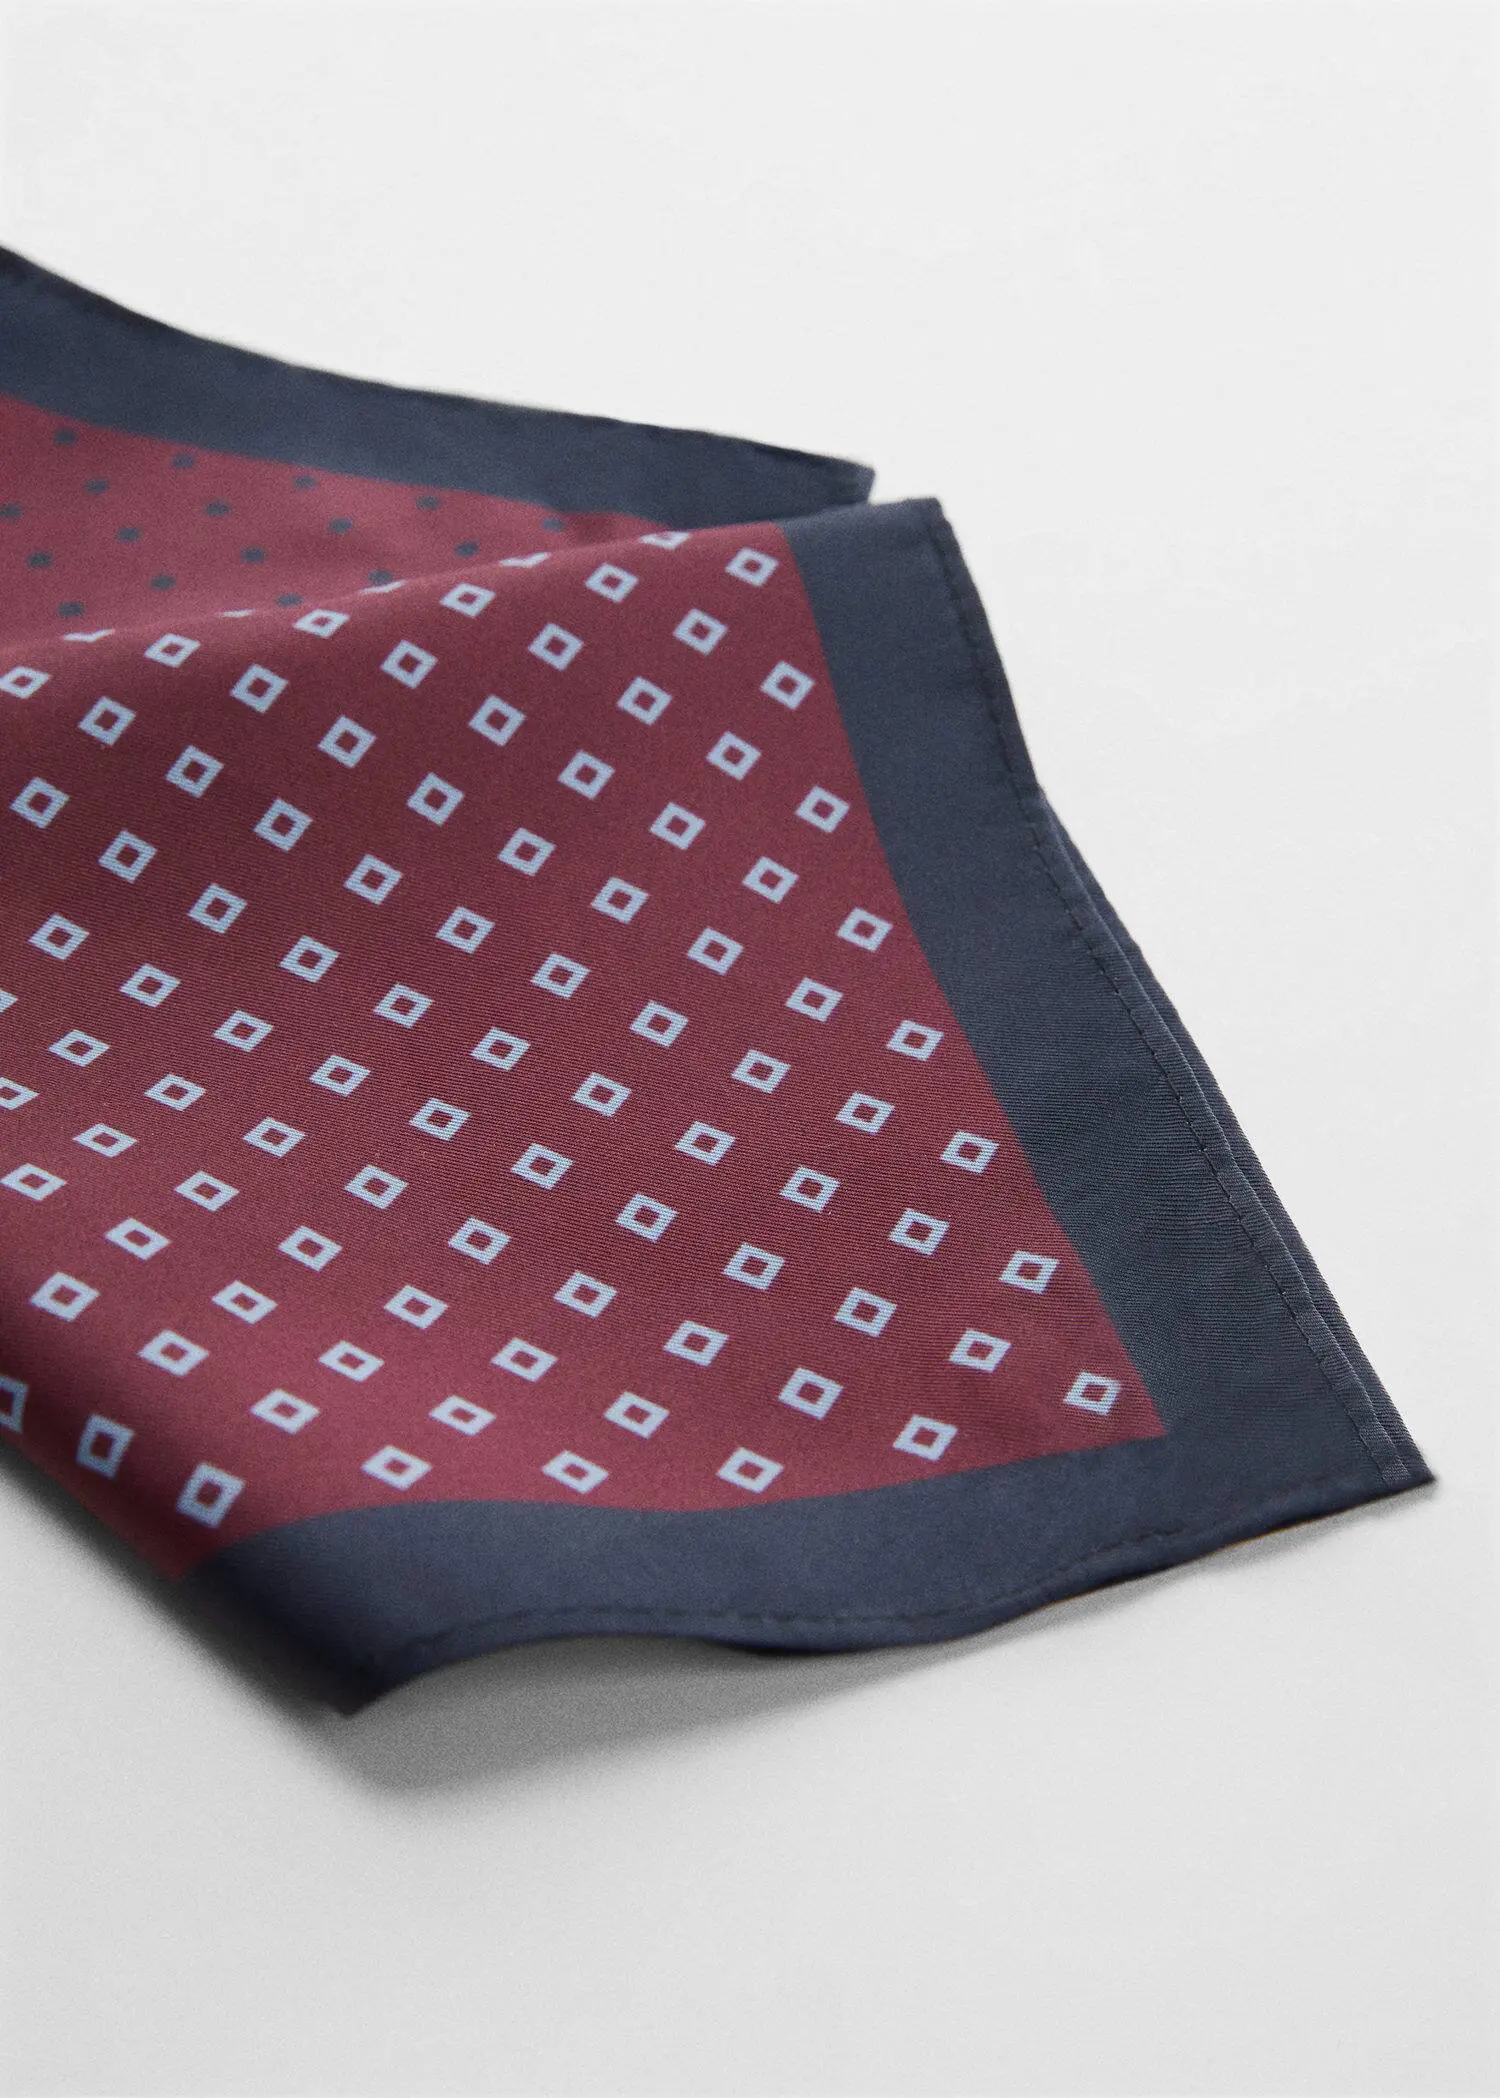 Mango Printed pocket square. a close-up of a red and white square patterned pocket square. 